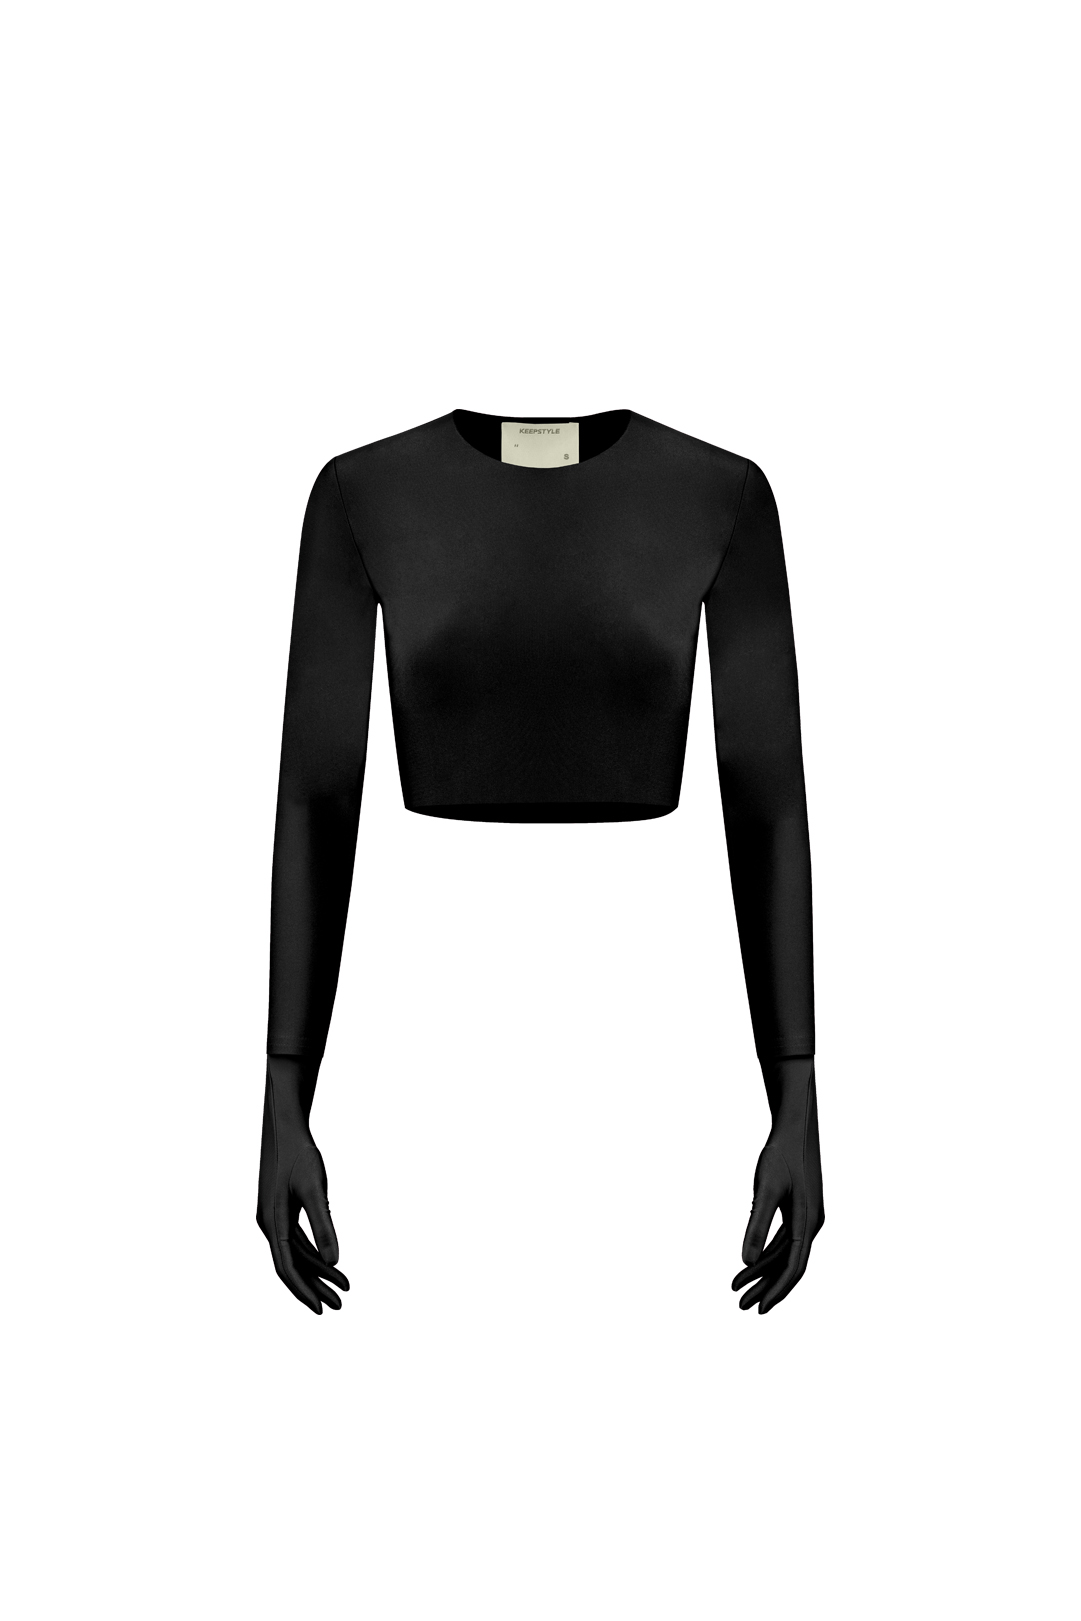 lilith top in black color